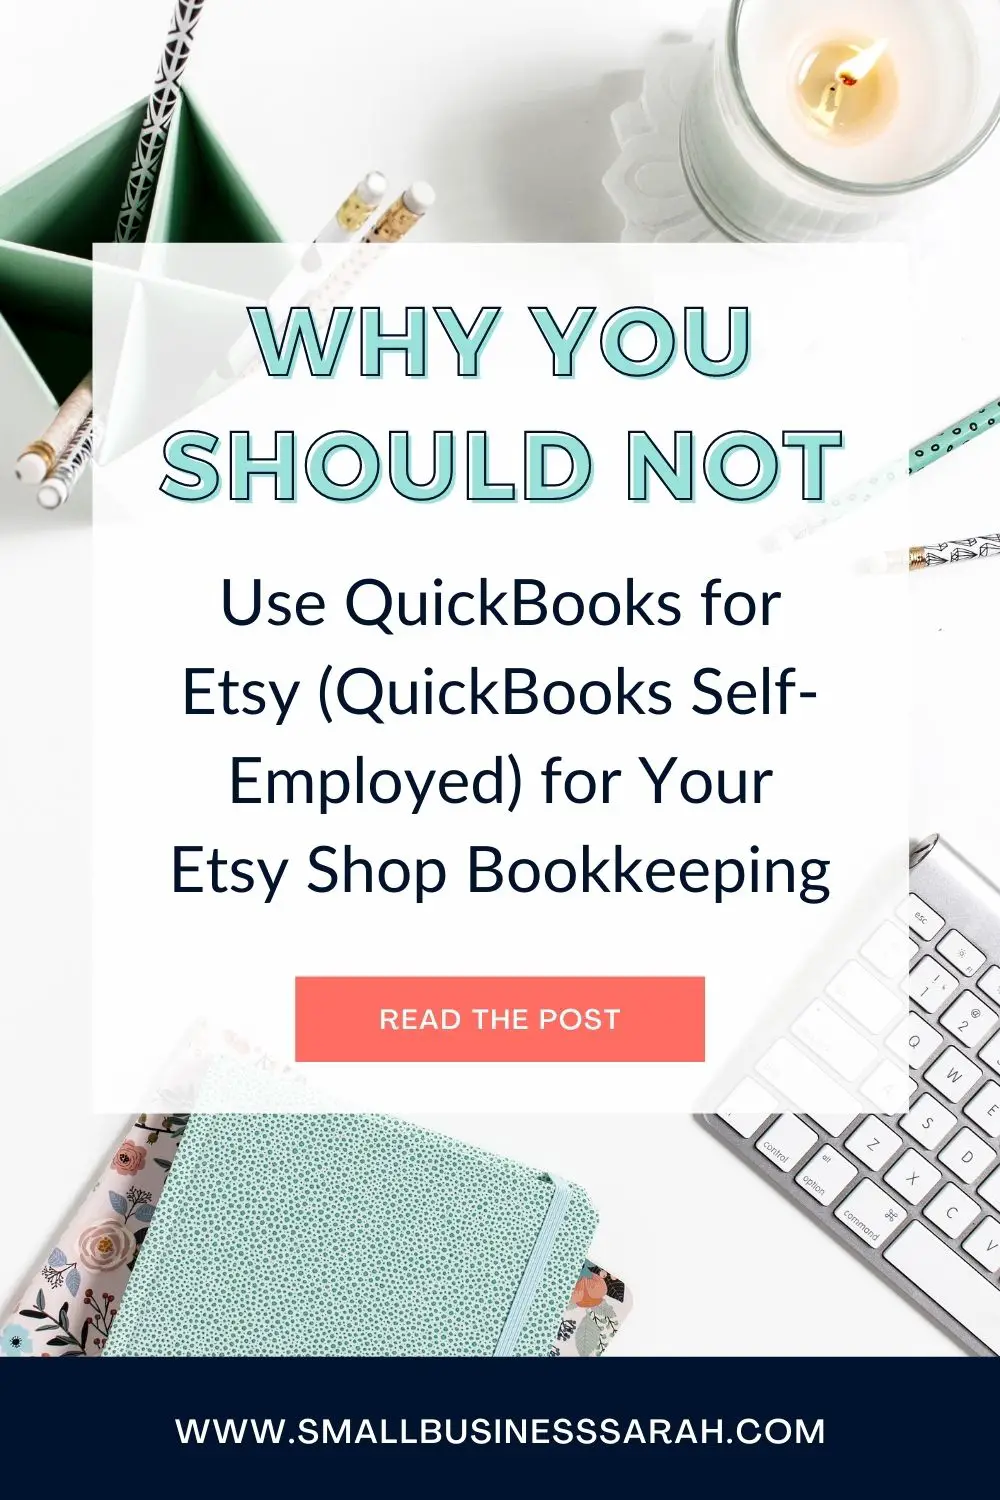 As a bookkeeping who works with Etsy shop owner, I recommend using QuickBooks Online. However, there are different kinds of QuickBooks options. Check out this post to find out why you shouldn't use QuickBooks for Etsy for your Etsy shop bookkeeping.